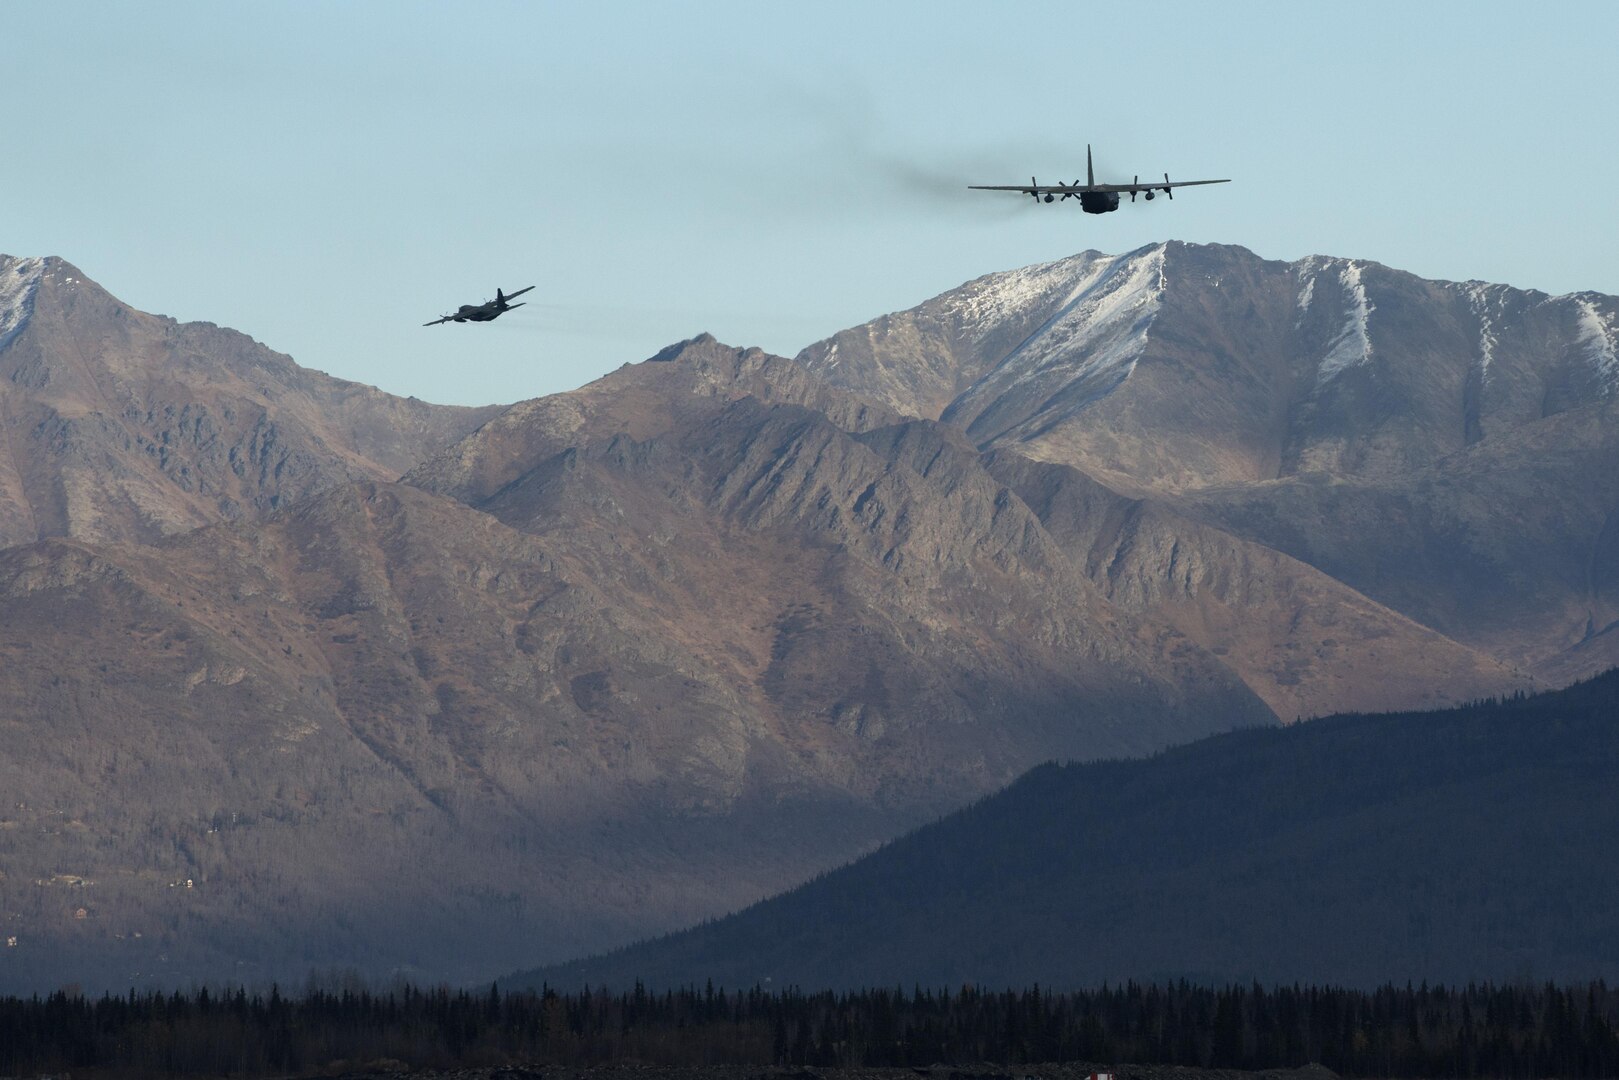 Two Republic of Korea Air Force C-130 Hercules depart Joint Base Elmendorf-Richardson during Red Flag - Alaska 17-1 Oct. 12, 2016. RF-A is a joint exercise focused on improving combat readiness of the U.S. military and international forces, which included the ROKAF and Royal New Zealand Air Force this iteration.